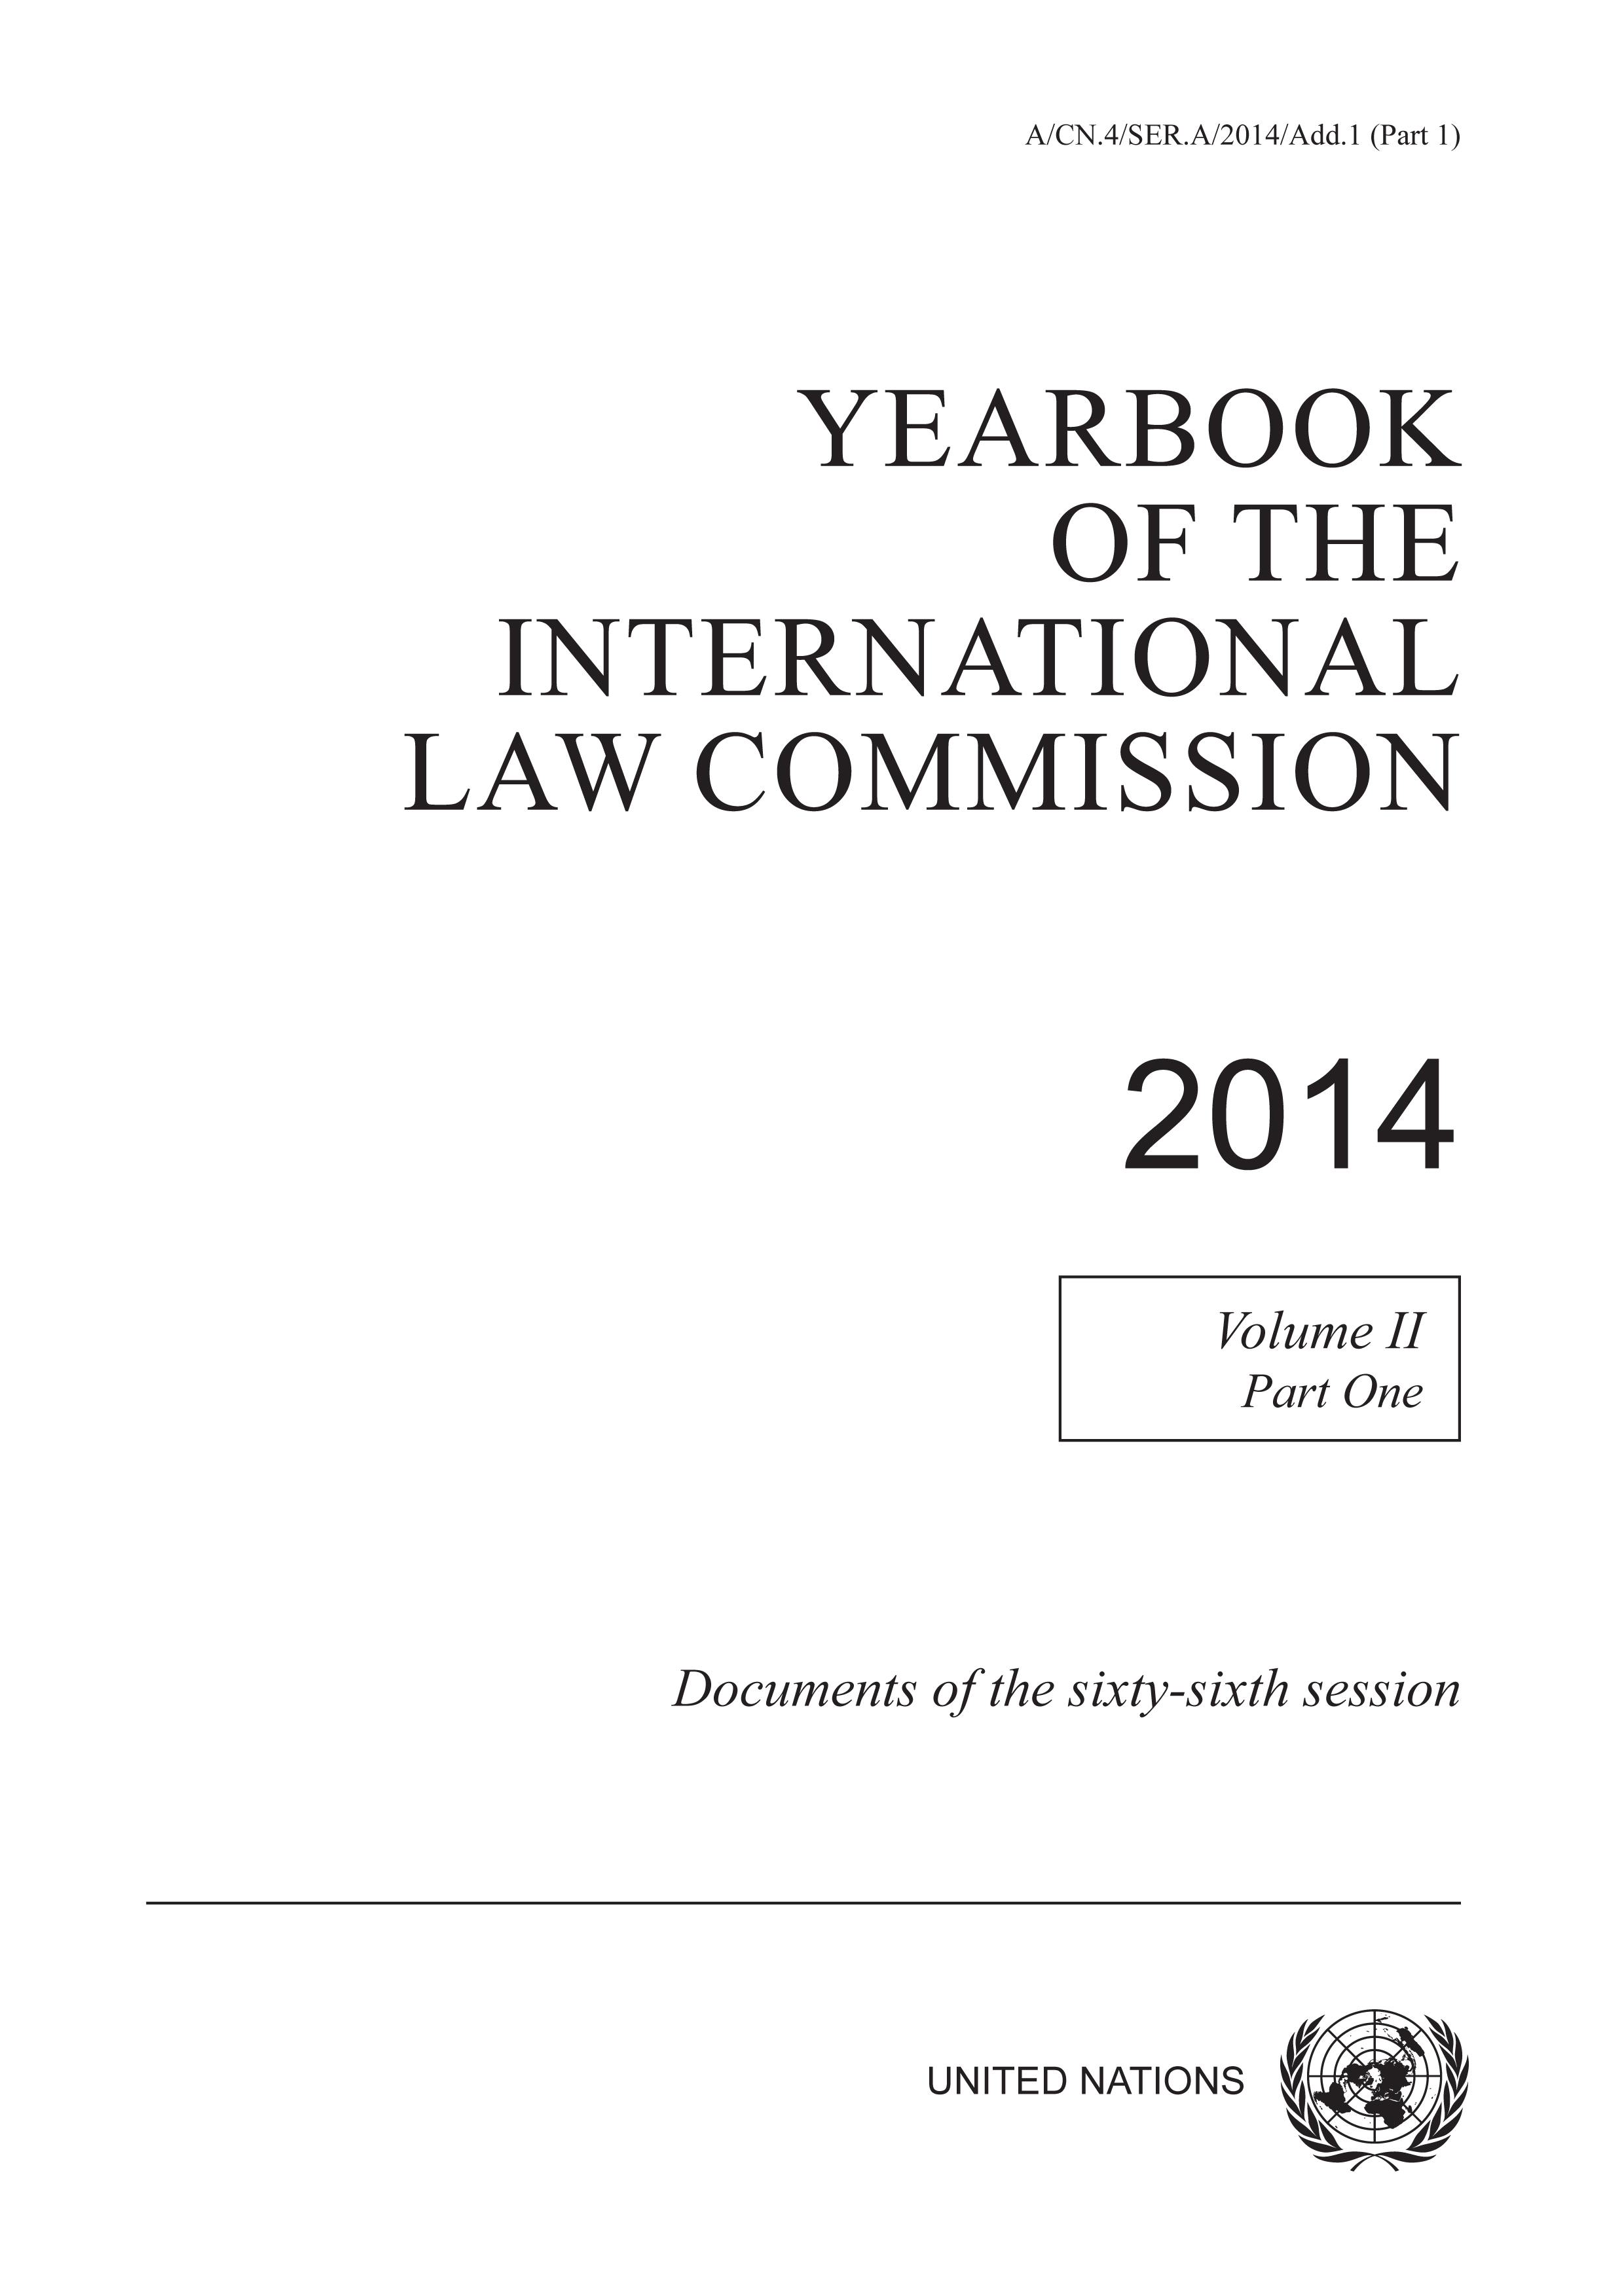 image of Yearbook of the International Law Commission 2014, Vol. II, Part 1